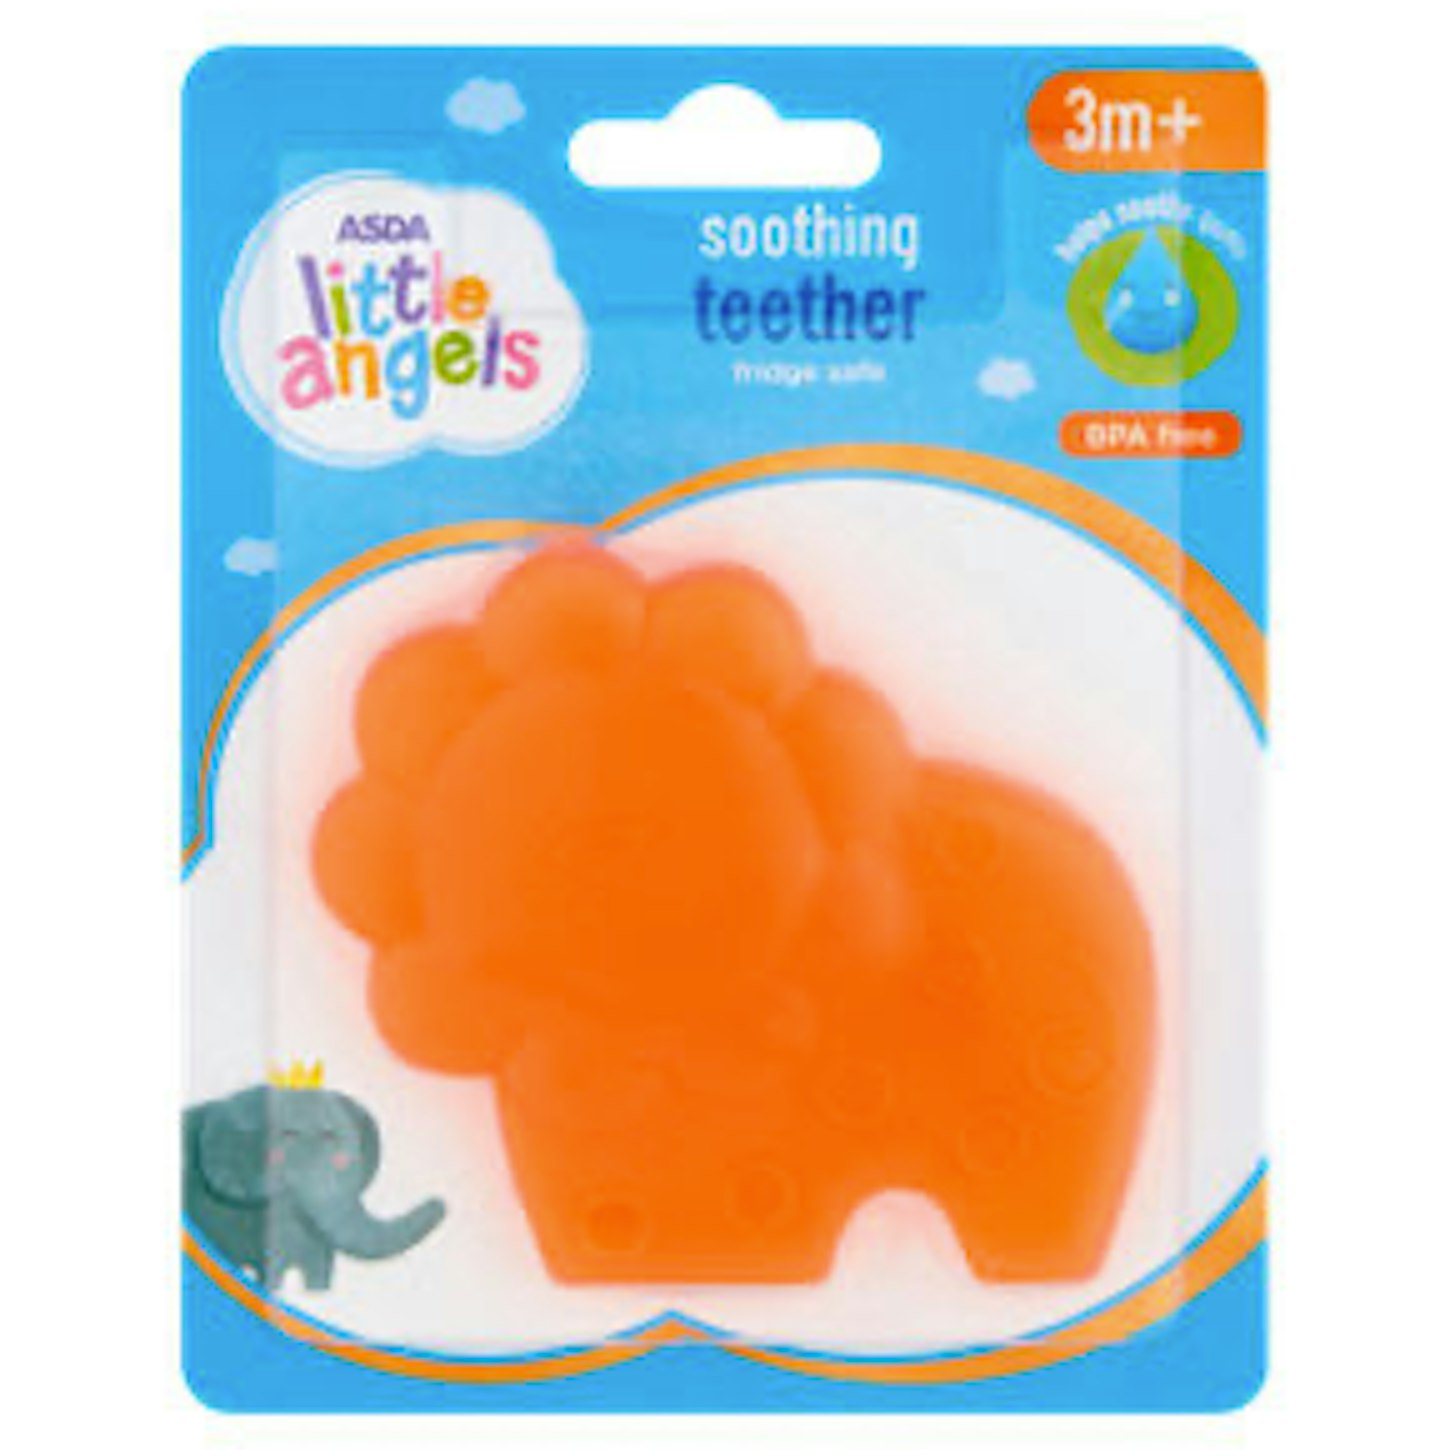 ASDA Little Angels Water Filled Teether